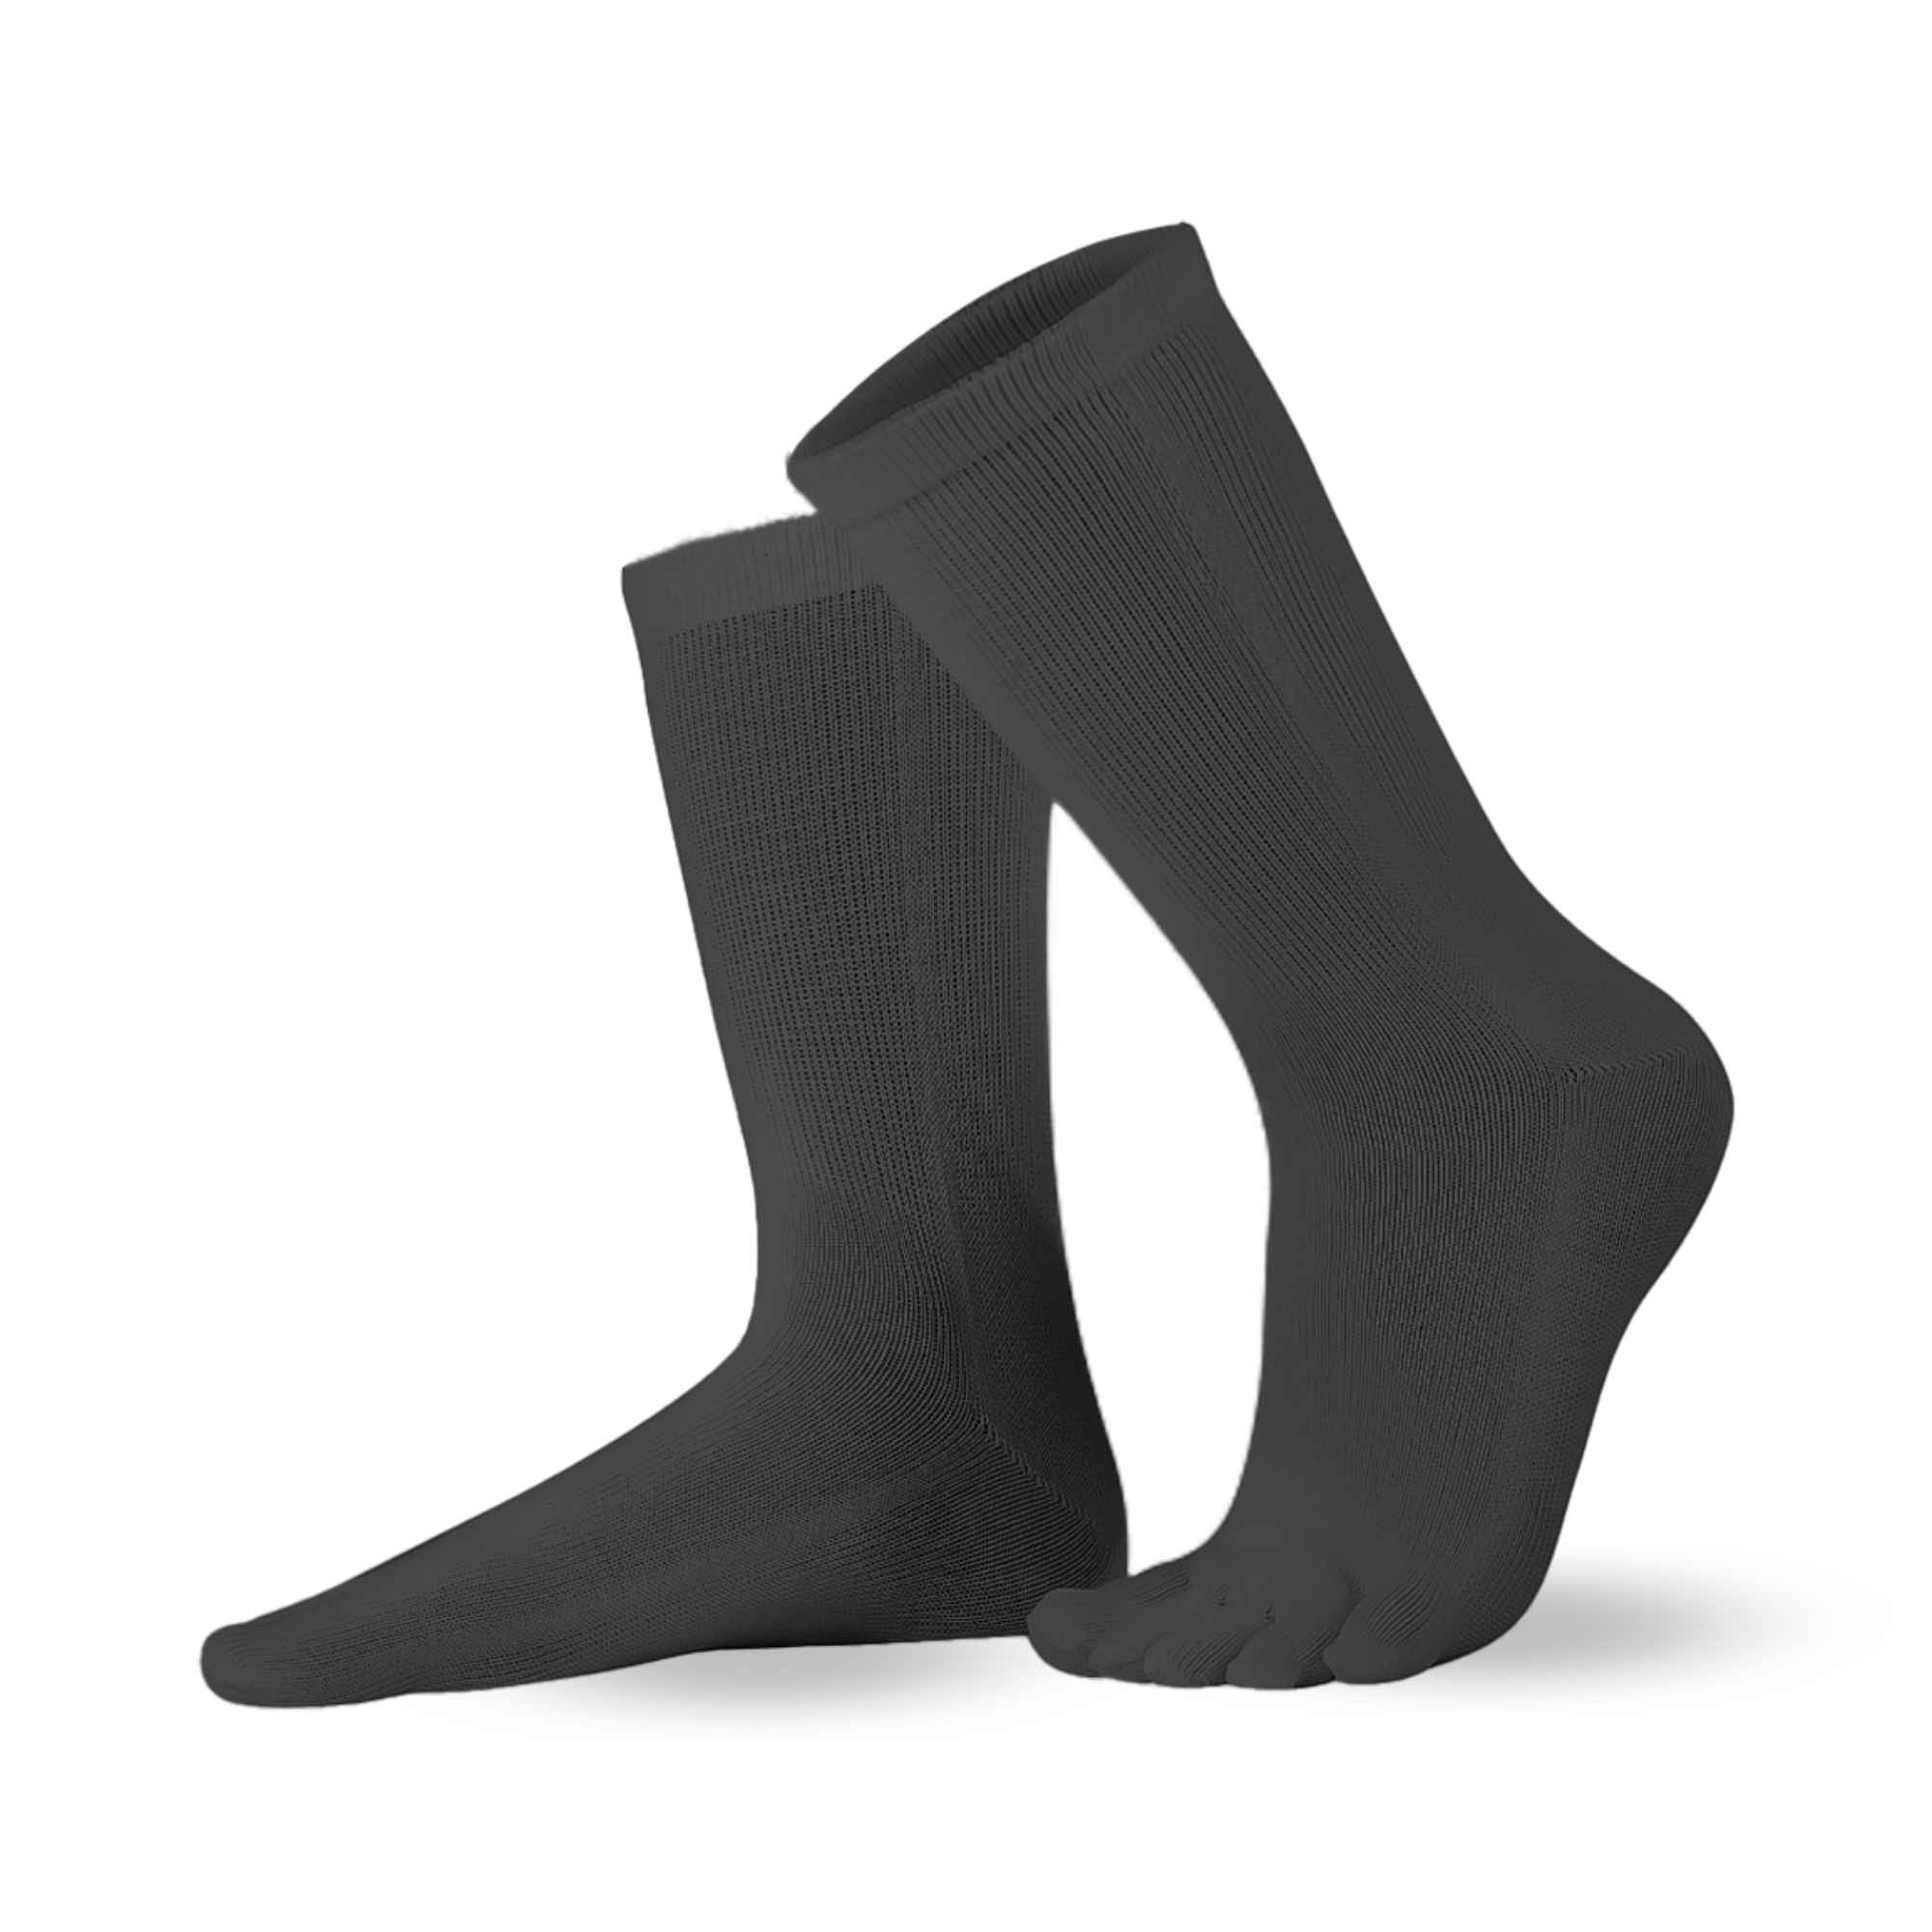 Knitido Essentials toe socks from cotton in gray